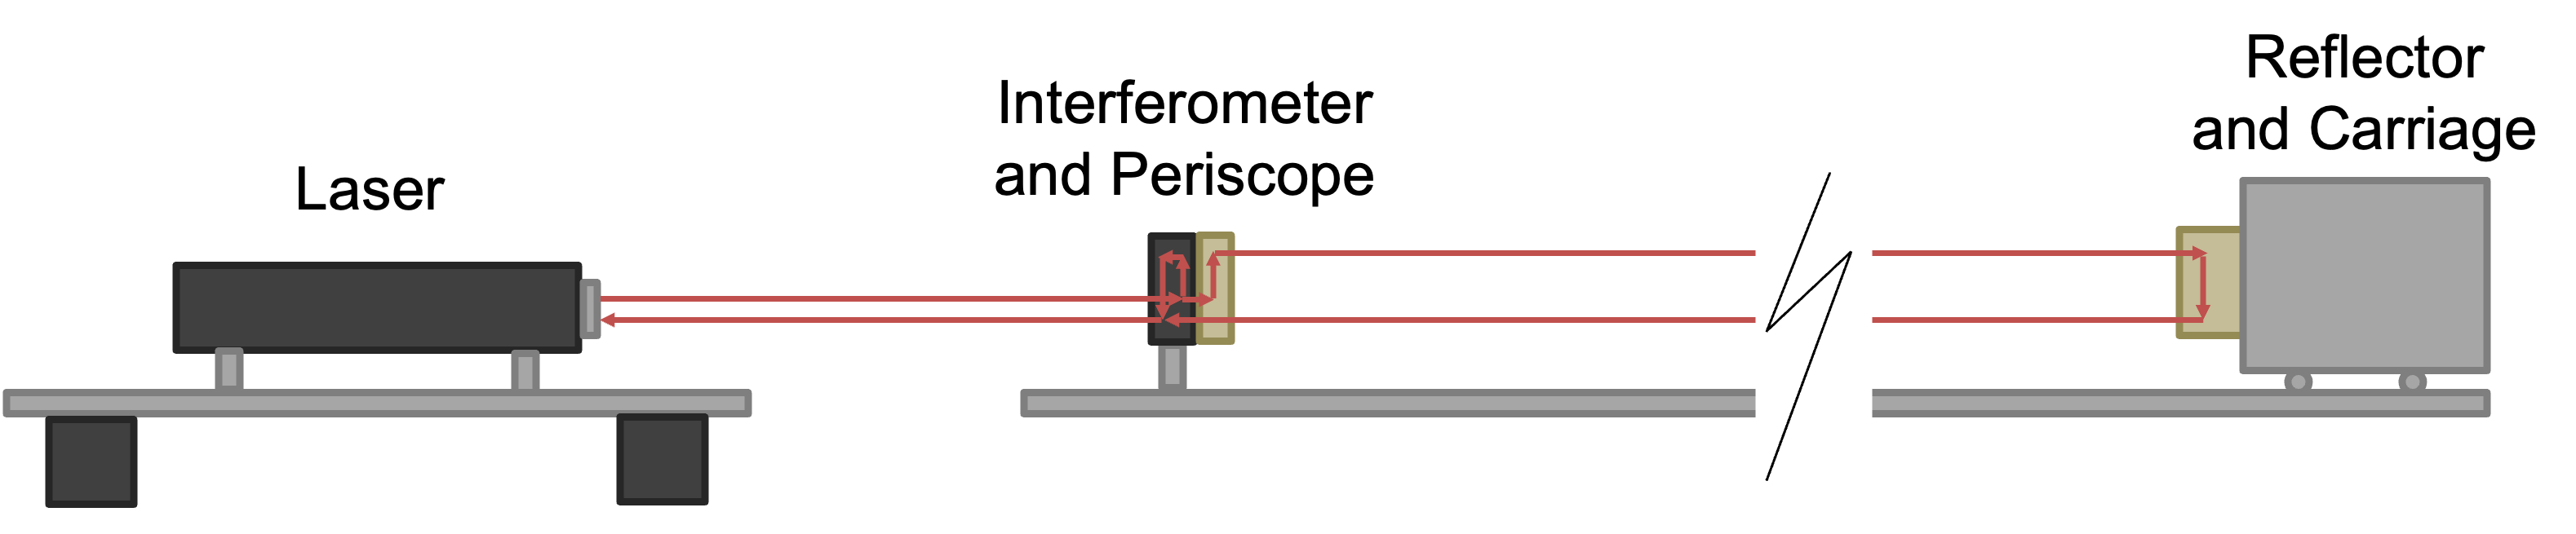 Diagram shows laser at left, interferometer at center and reflector at right. 